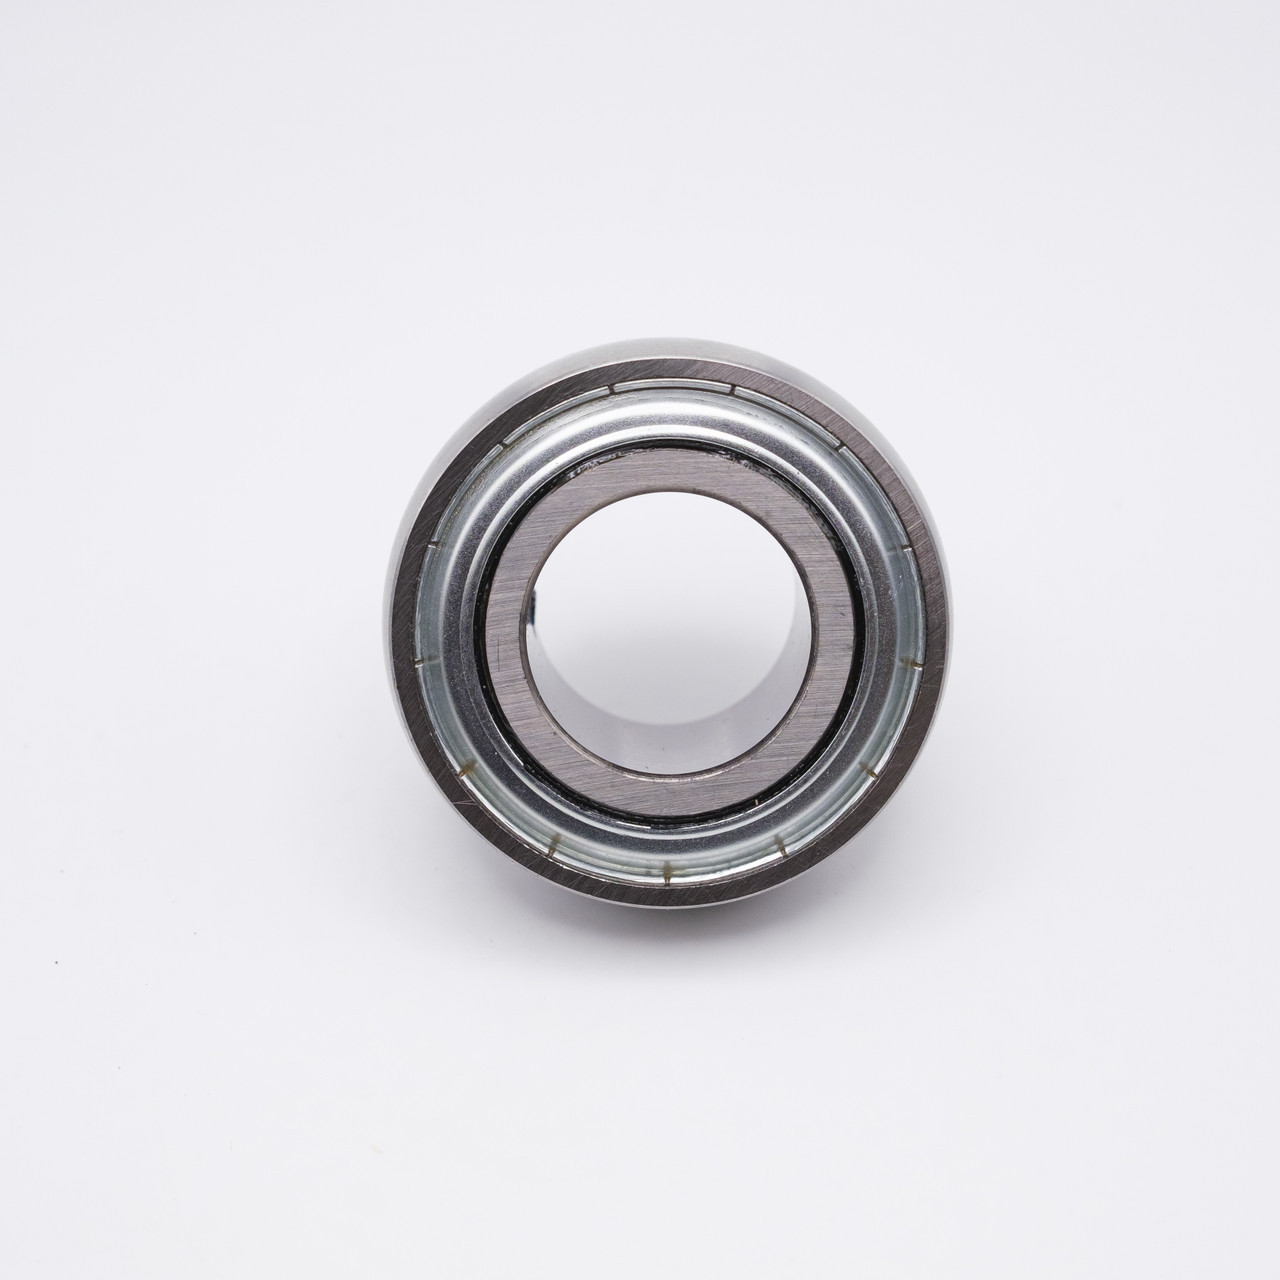 SB202 Crowned Outer Insert Bearing Set Screw 15mm bore Back view